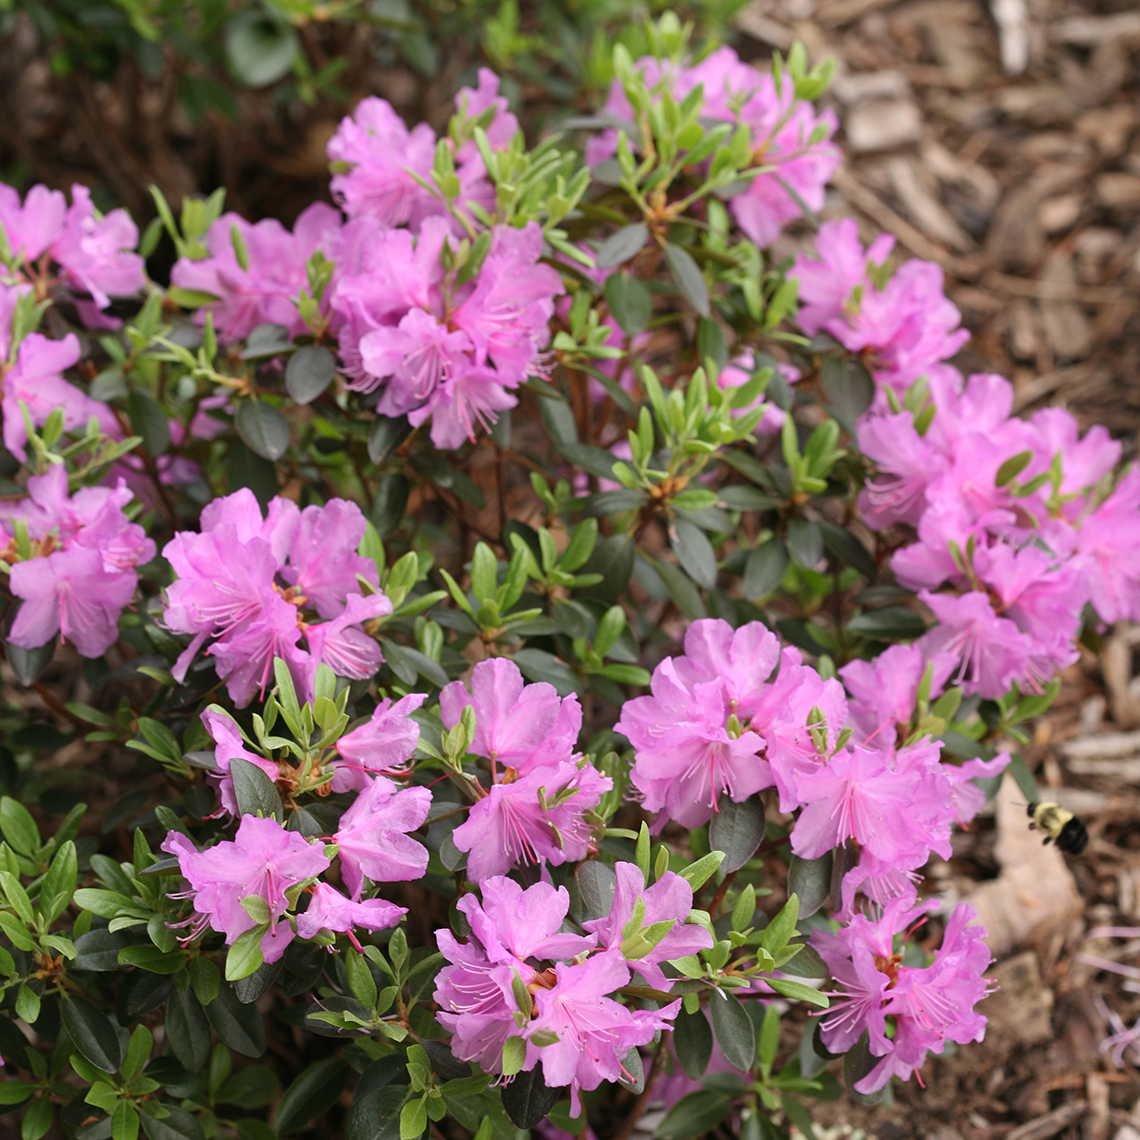 Blooming Rhododendron Amy Cotta in mulched landcape